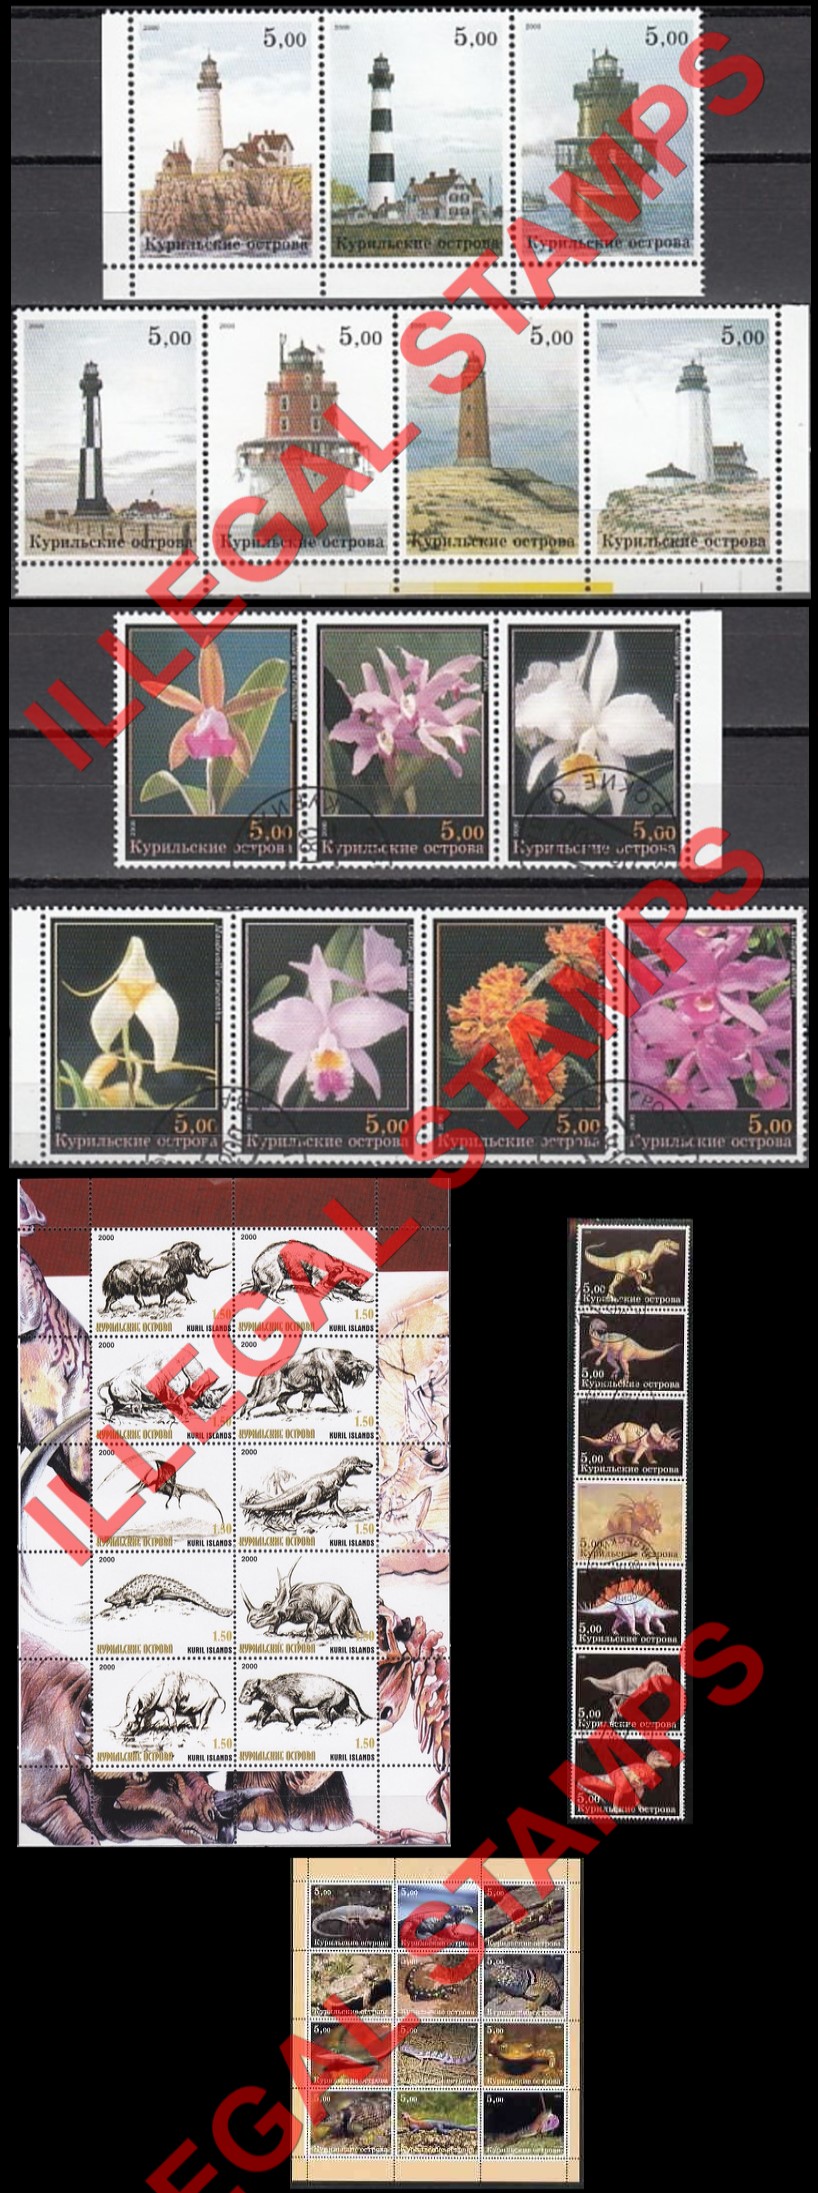 Kuril Islands 2000 Counterfeit Illegal Stamps